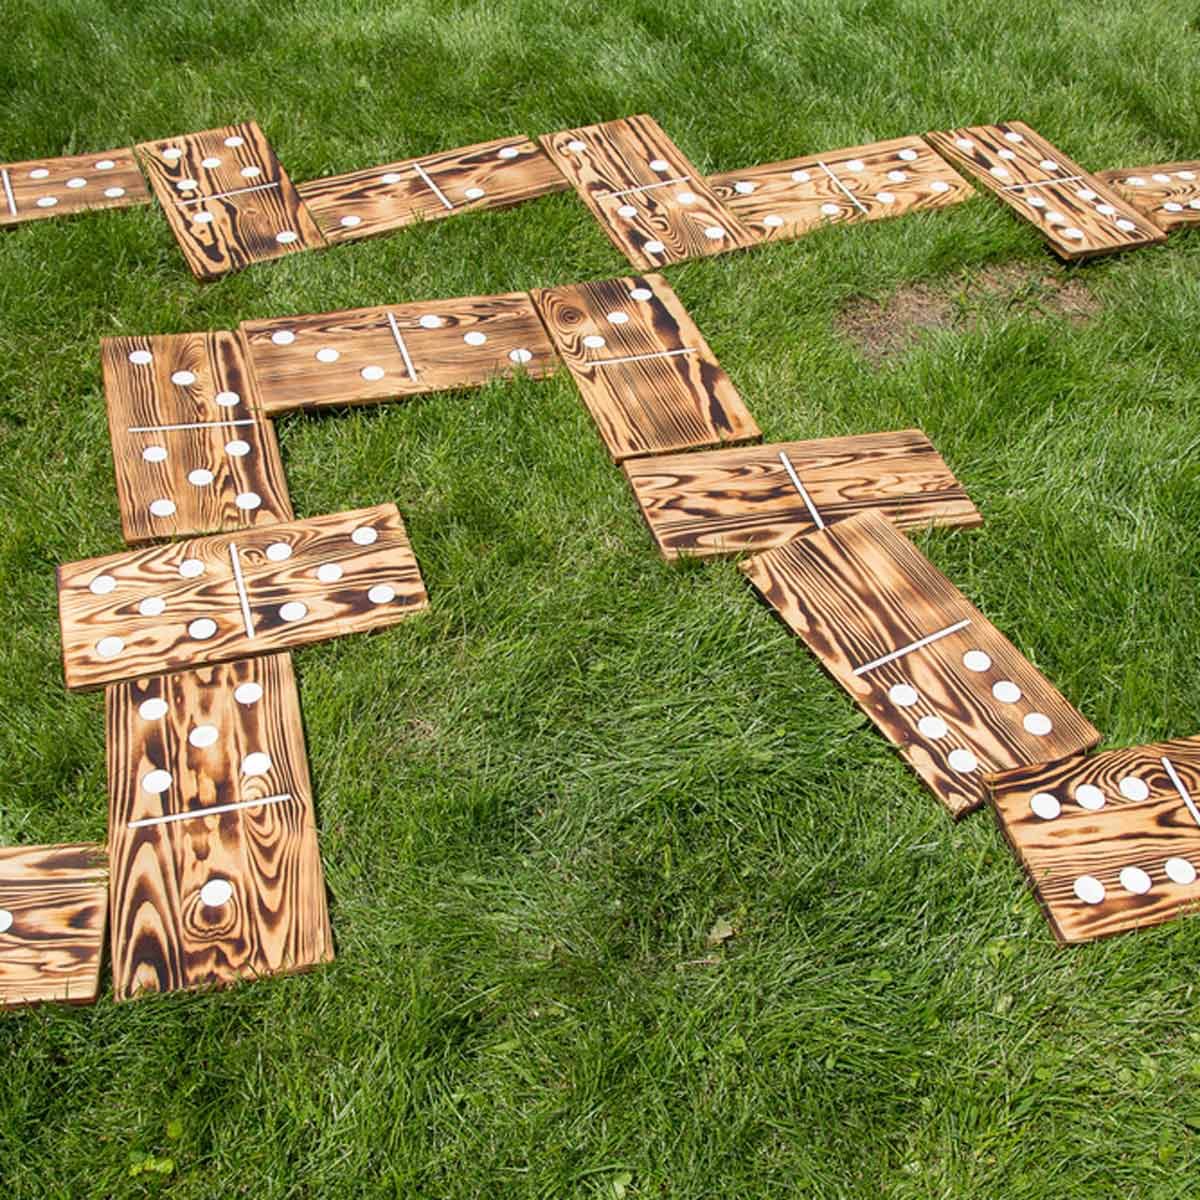 12 DIY Backyard Games and Sport Courts